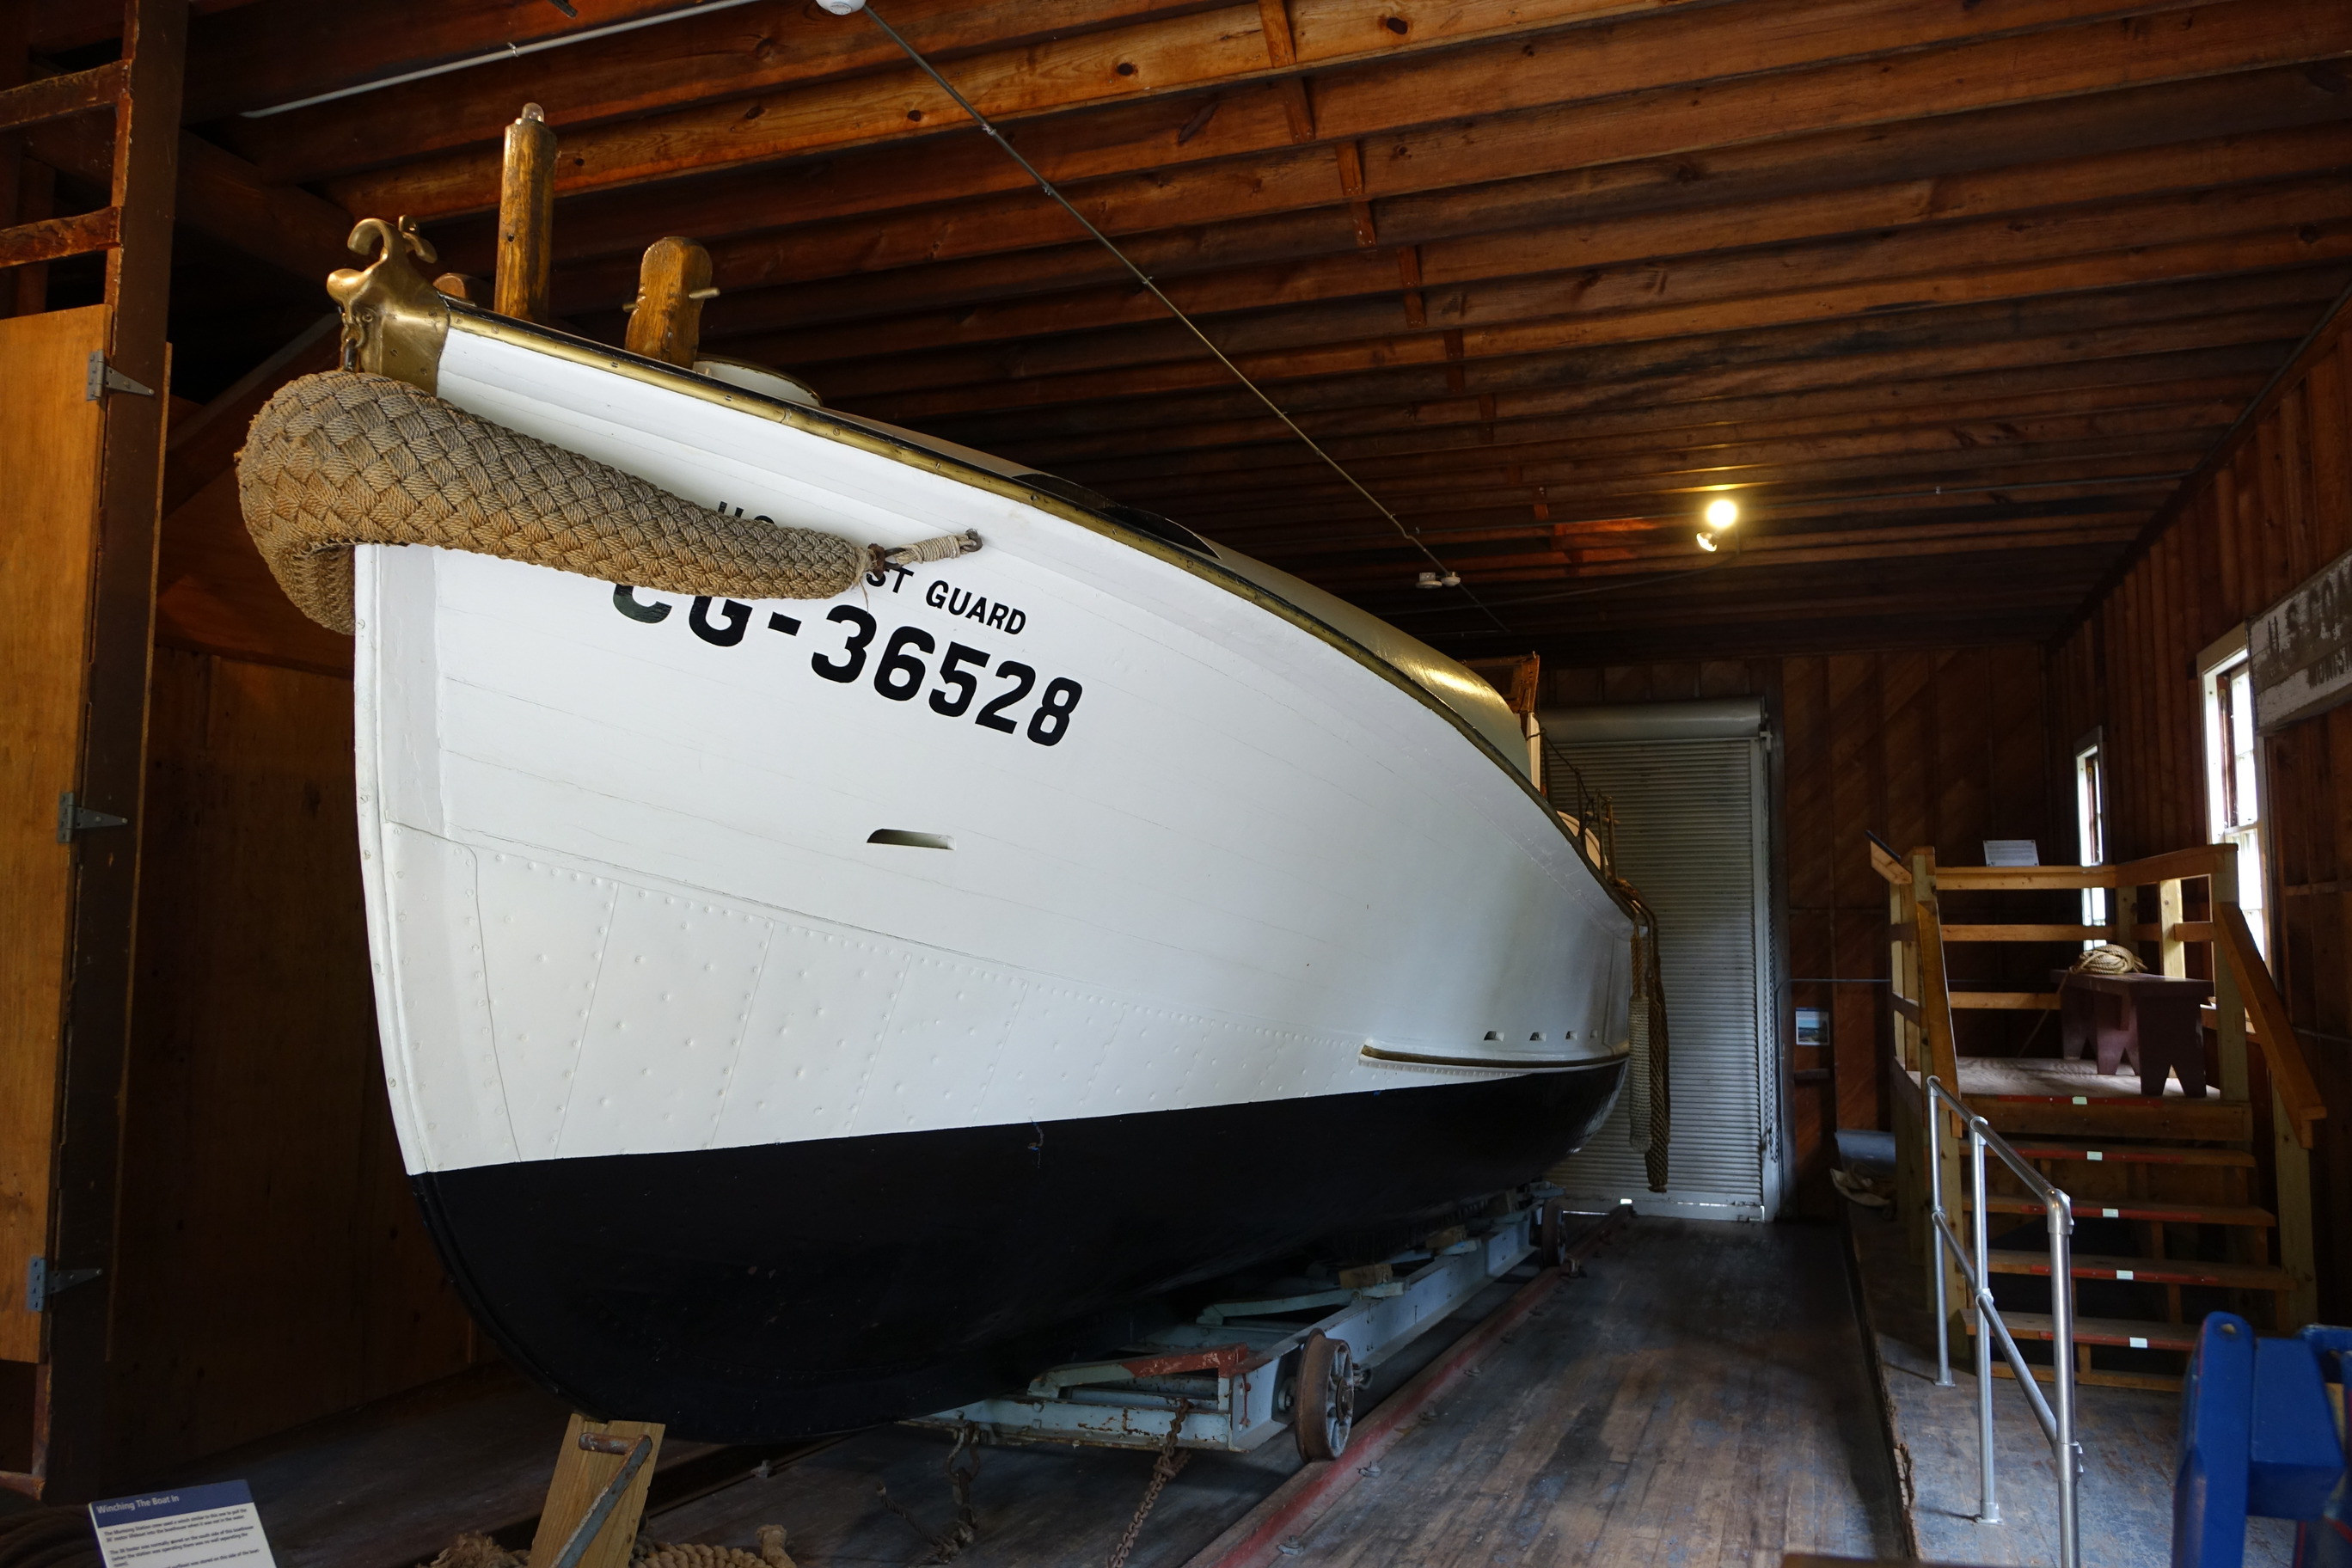 The thirty-six foot boat is in a wooden building. The boat sits on a low wheeled cradle that is on rails. 